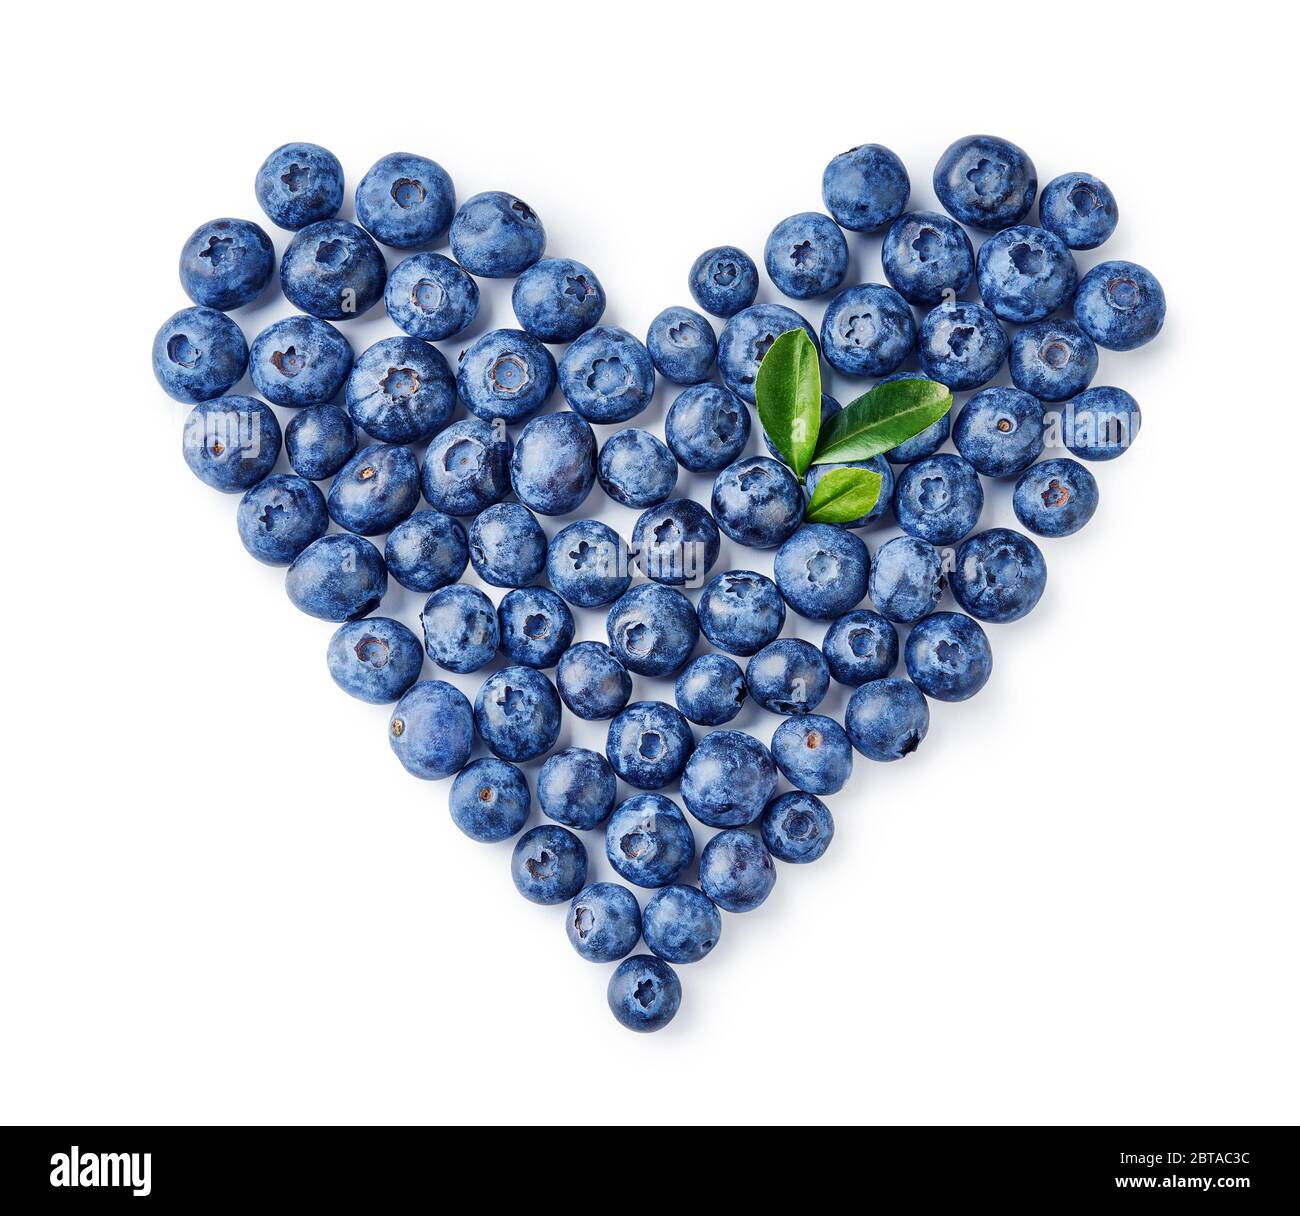 Heart made of blueberries and blueberry leaves isolated on a white background Stock Photo